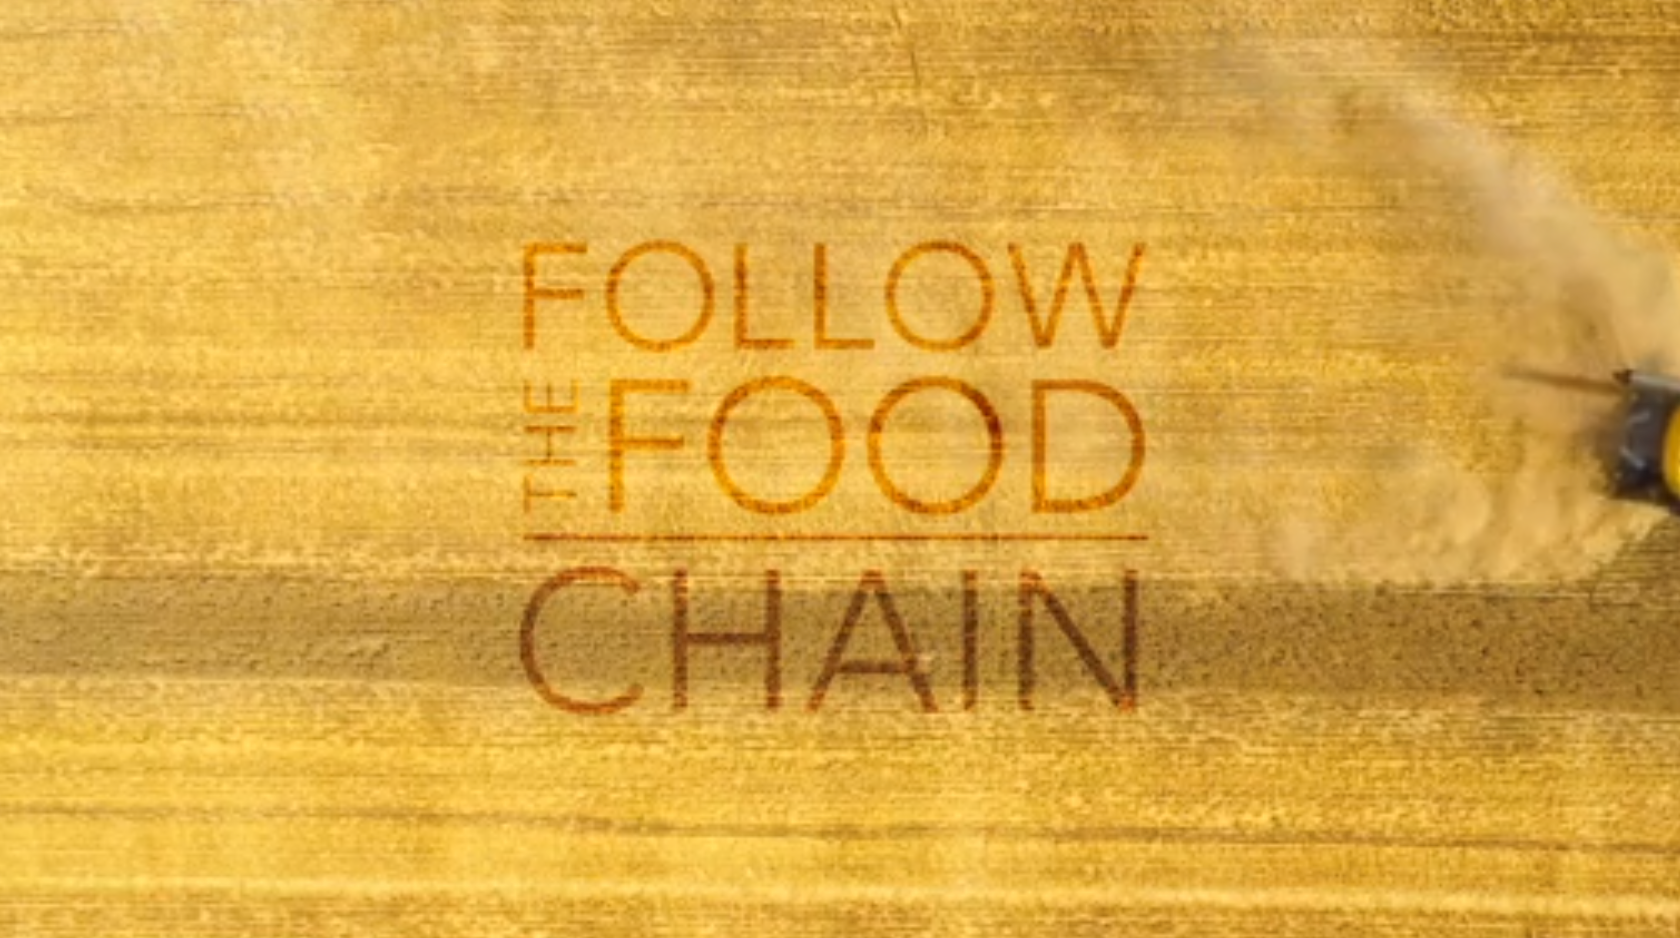 This article is part of Follow the Food, a series investigating how agriculture is responding to environmental challenges. Follow the Food traces emerging answers to these problems – both high-tech and low-tech, local and global – from farmers, growers and researchers across six continents.